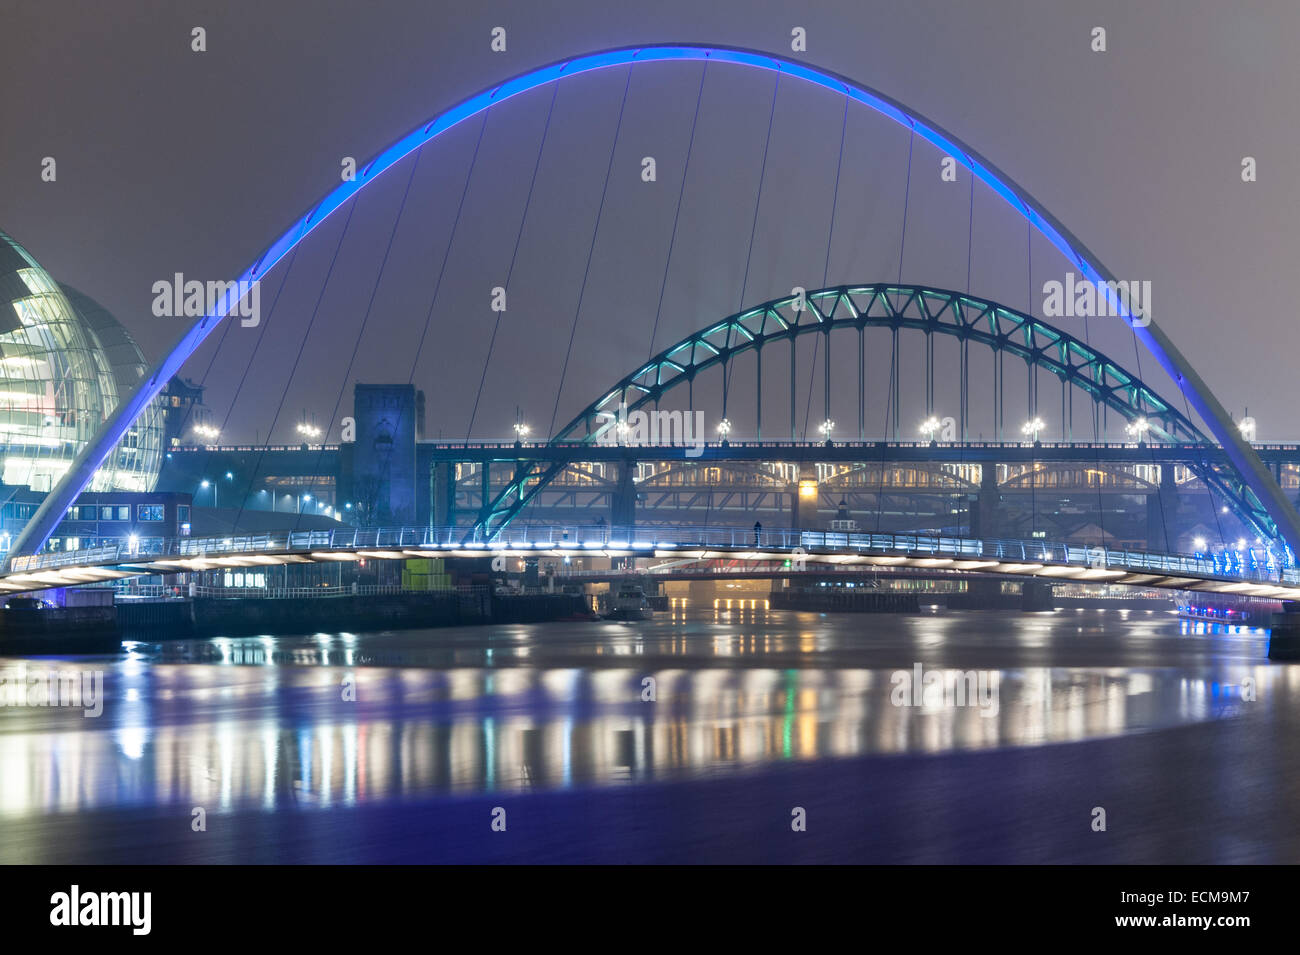 The bridges over the River Tyne in Newcastle-upon-Tyne, England seen at night. Stock Photo